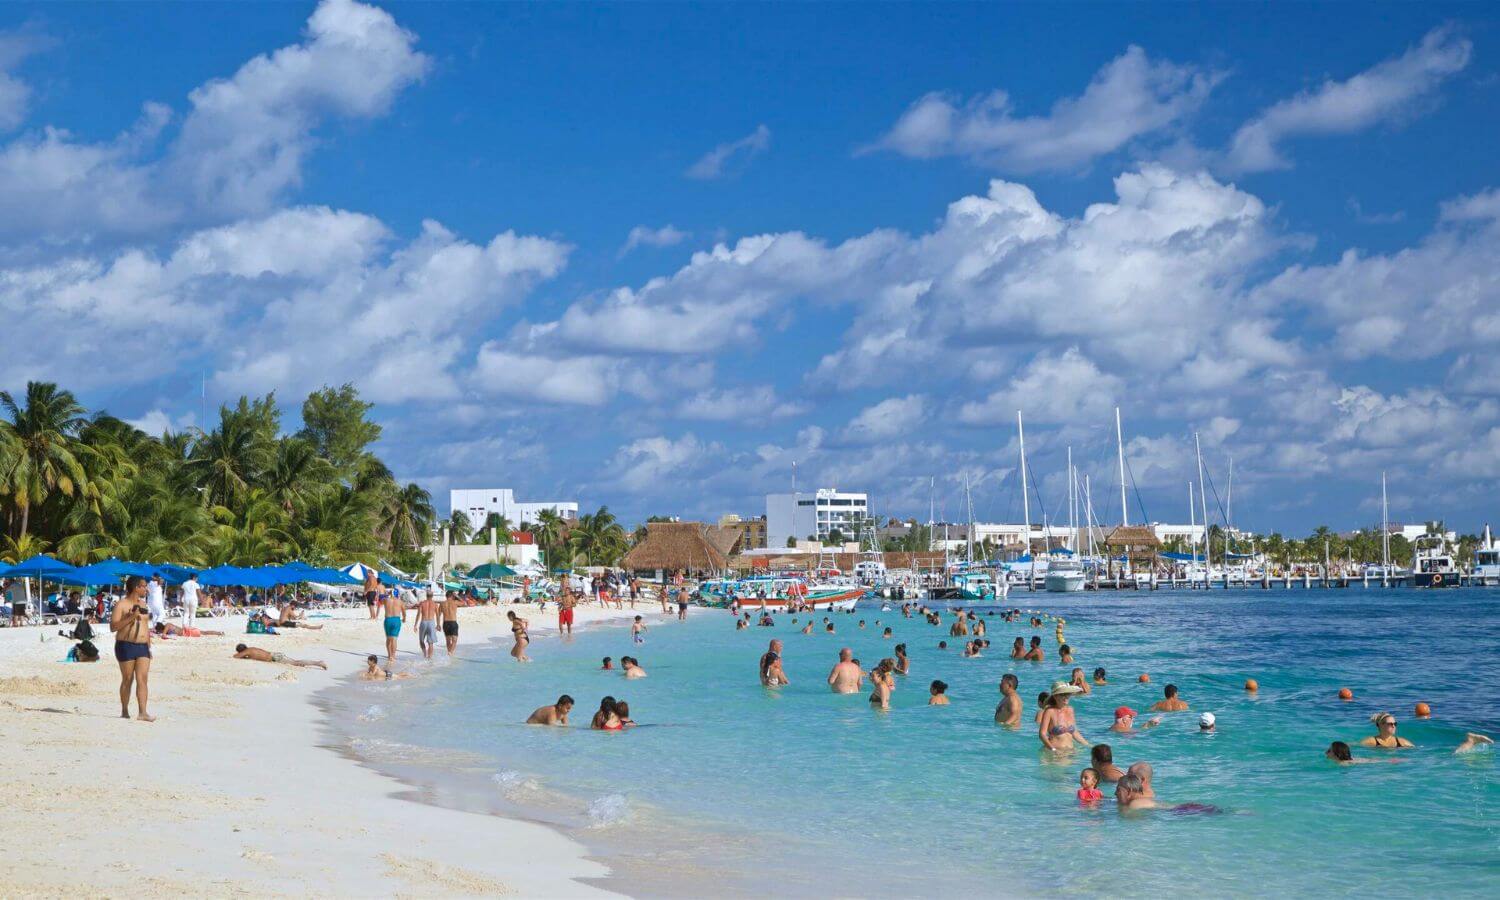 People on the beach and in the ocean at Playa Centro, Isla Mujeres